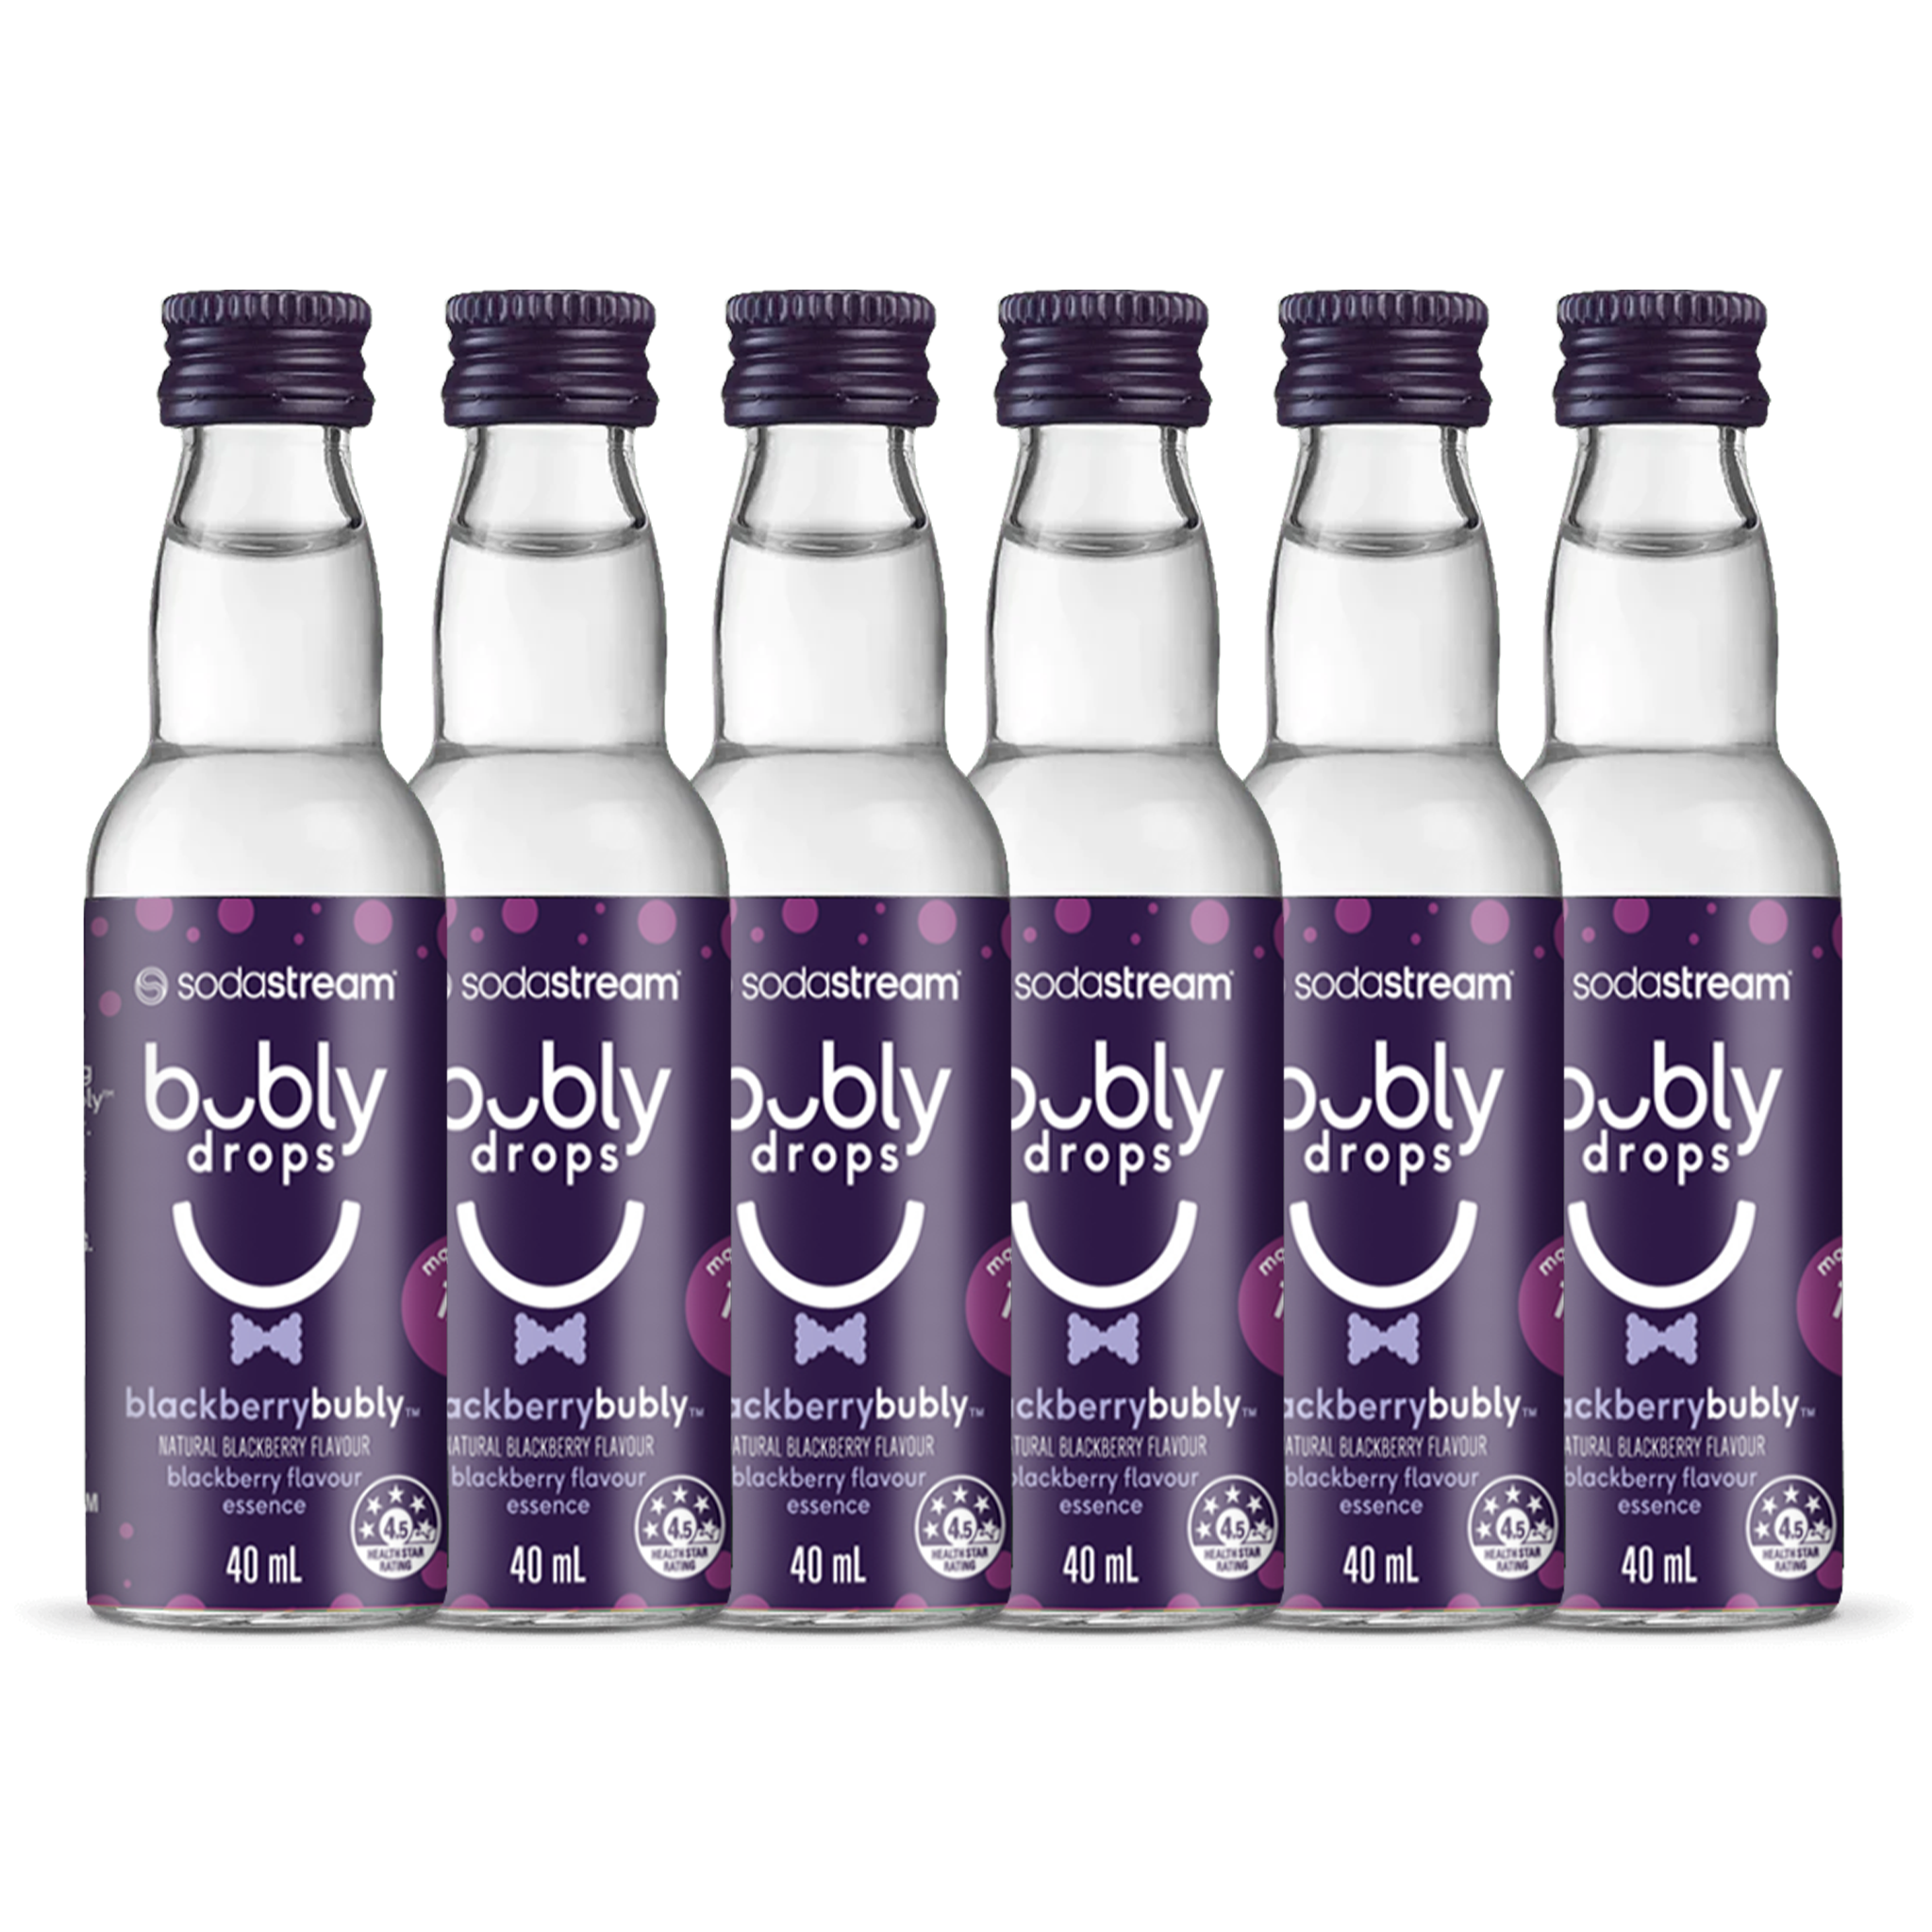 blackberry bubly drops™ 6 Pack